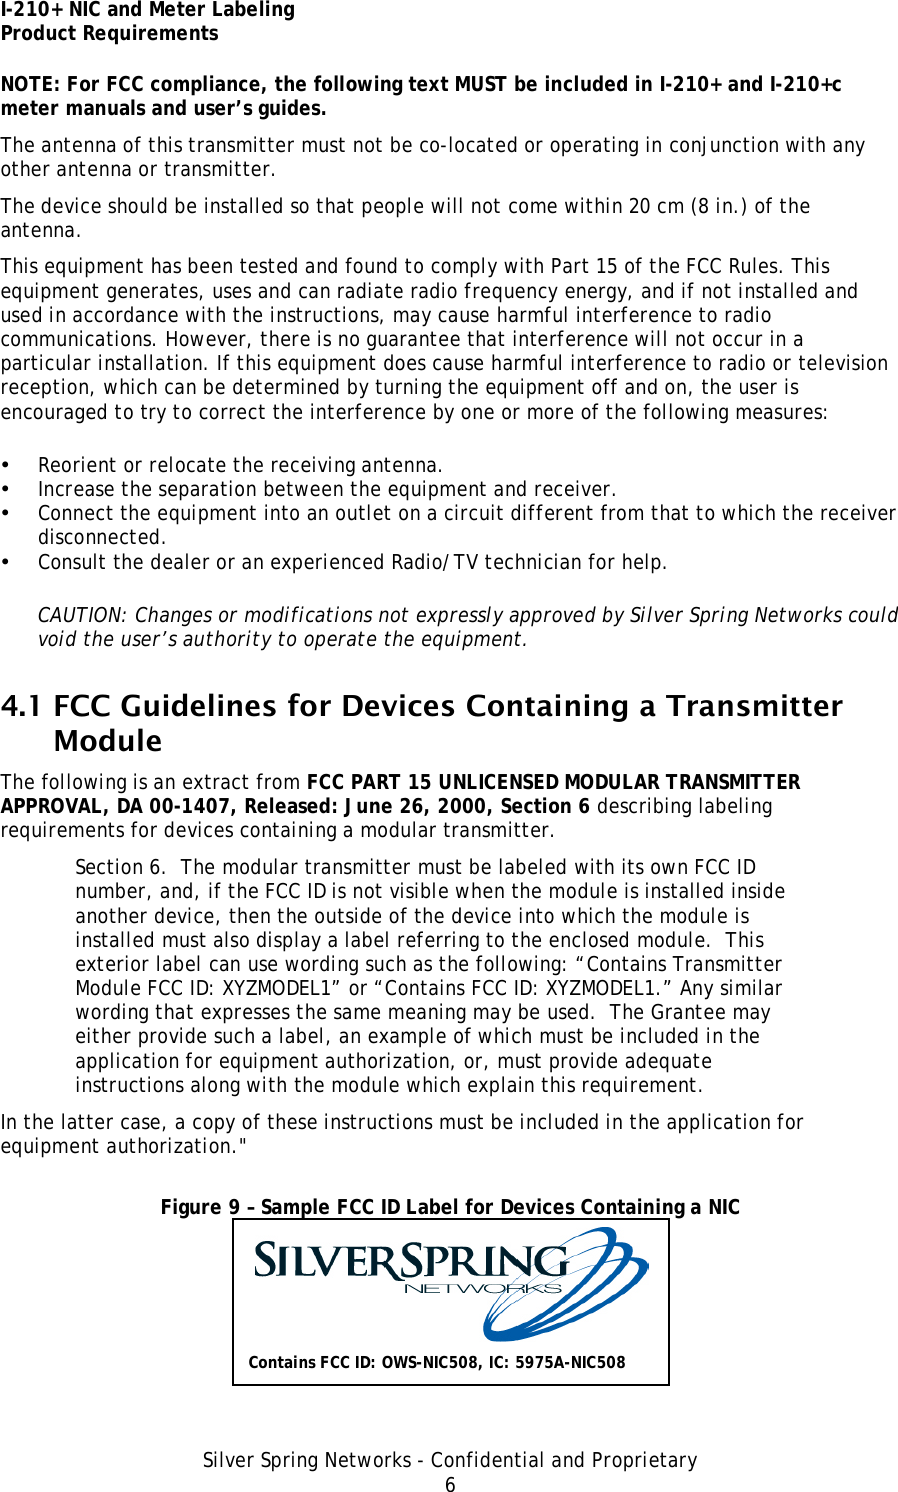 I-210+ NIC and Meter Labeling Product Requirements Silver Spring Networks - Confidential and Proprietary 6 NOTE: For FCC compliance, the following text MUST be included in I-210+ and I-210+c meter manuals and user’s guides. The antenna of this transmitter must not be co-located or operating in conjunction with any other antenna or transmitter. The device should be installed so that people will not come within 20 cm (8 in.) of the antenna. This equipment has been tested and found to comply with Part 15 of the FCC Rules. This equipment generates, uses and can radiate radio frequency energy, and if not installed and used in accordance with the instructions, may cause harmful interference to radio communications. However, there is no guarantee that interference will not occur in a particular installation. If this equipment does cause harmful interference to radio or television reception, which can be determined by turning the equipment off and on, the user is encouraged to try to correct the interference by one or more of the following measures: • Reorient or relocate the receiving antenna. • Increase the separation between the equipment and receiver. • Connect the equipment into an outlet on a circuit different from that to which the receiver disconnected. • Consult the dealer or an experienced Radio/TV technician for help. CAUTION: Changes or modifications not expressly approved by Silver Spring Networks could void the user’s authority to operate the equipment. 4.1 FCC Guidelines for Devices Containing a Transmitter Module The following is an extract from FCC PART 15 UNLICENSED MODULAR TRANSMITTER APPROVAL, DA 00-1407, Released: June 26, 2000, Section 6 describing labeling requirements for devices containing a modular transmitter. Section 6.  The modular transmitter must be labeled with its own FCC ID number, and, if the FCC ID is not visible when the module is installed inside another device, then the outside of the device into which the module is installed must also display a label referring to the enclosed module.  This exterior label can use wording such as the following: “Contains Transmitter Module FCC ID: XYZMODEL1” or “Contains FCC ID: XYZMODEL1.” Any similar wording that expresses the same meaning may be used.  The Grantee may either provide such a label, an example of which must be included in the application for equipment authorization, or, must provide adequate instructions along with the module which explain this requirement.  In the latter case, a copy of these instructions must be included in the application for equipment authorization.&quot;  Figure 9 – Sample FCC ID Label for Devices Containing a NIC  Contains FCC ID: OWS-NIC508, IC: 5975A-NIC508 